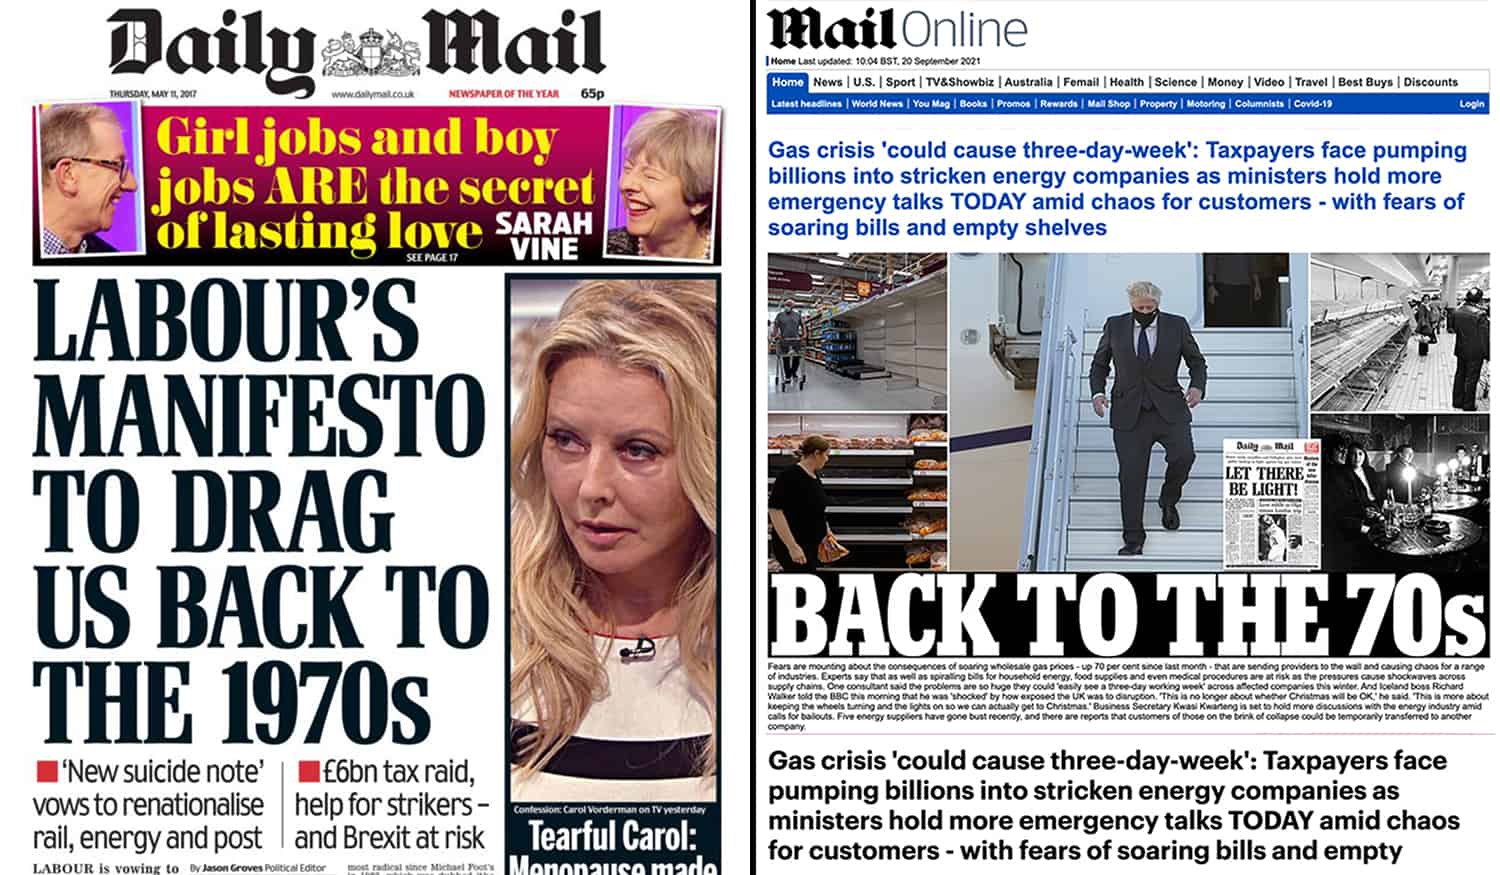 Daily Mail reminded of 2017 front page warning people off Labour